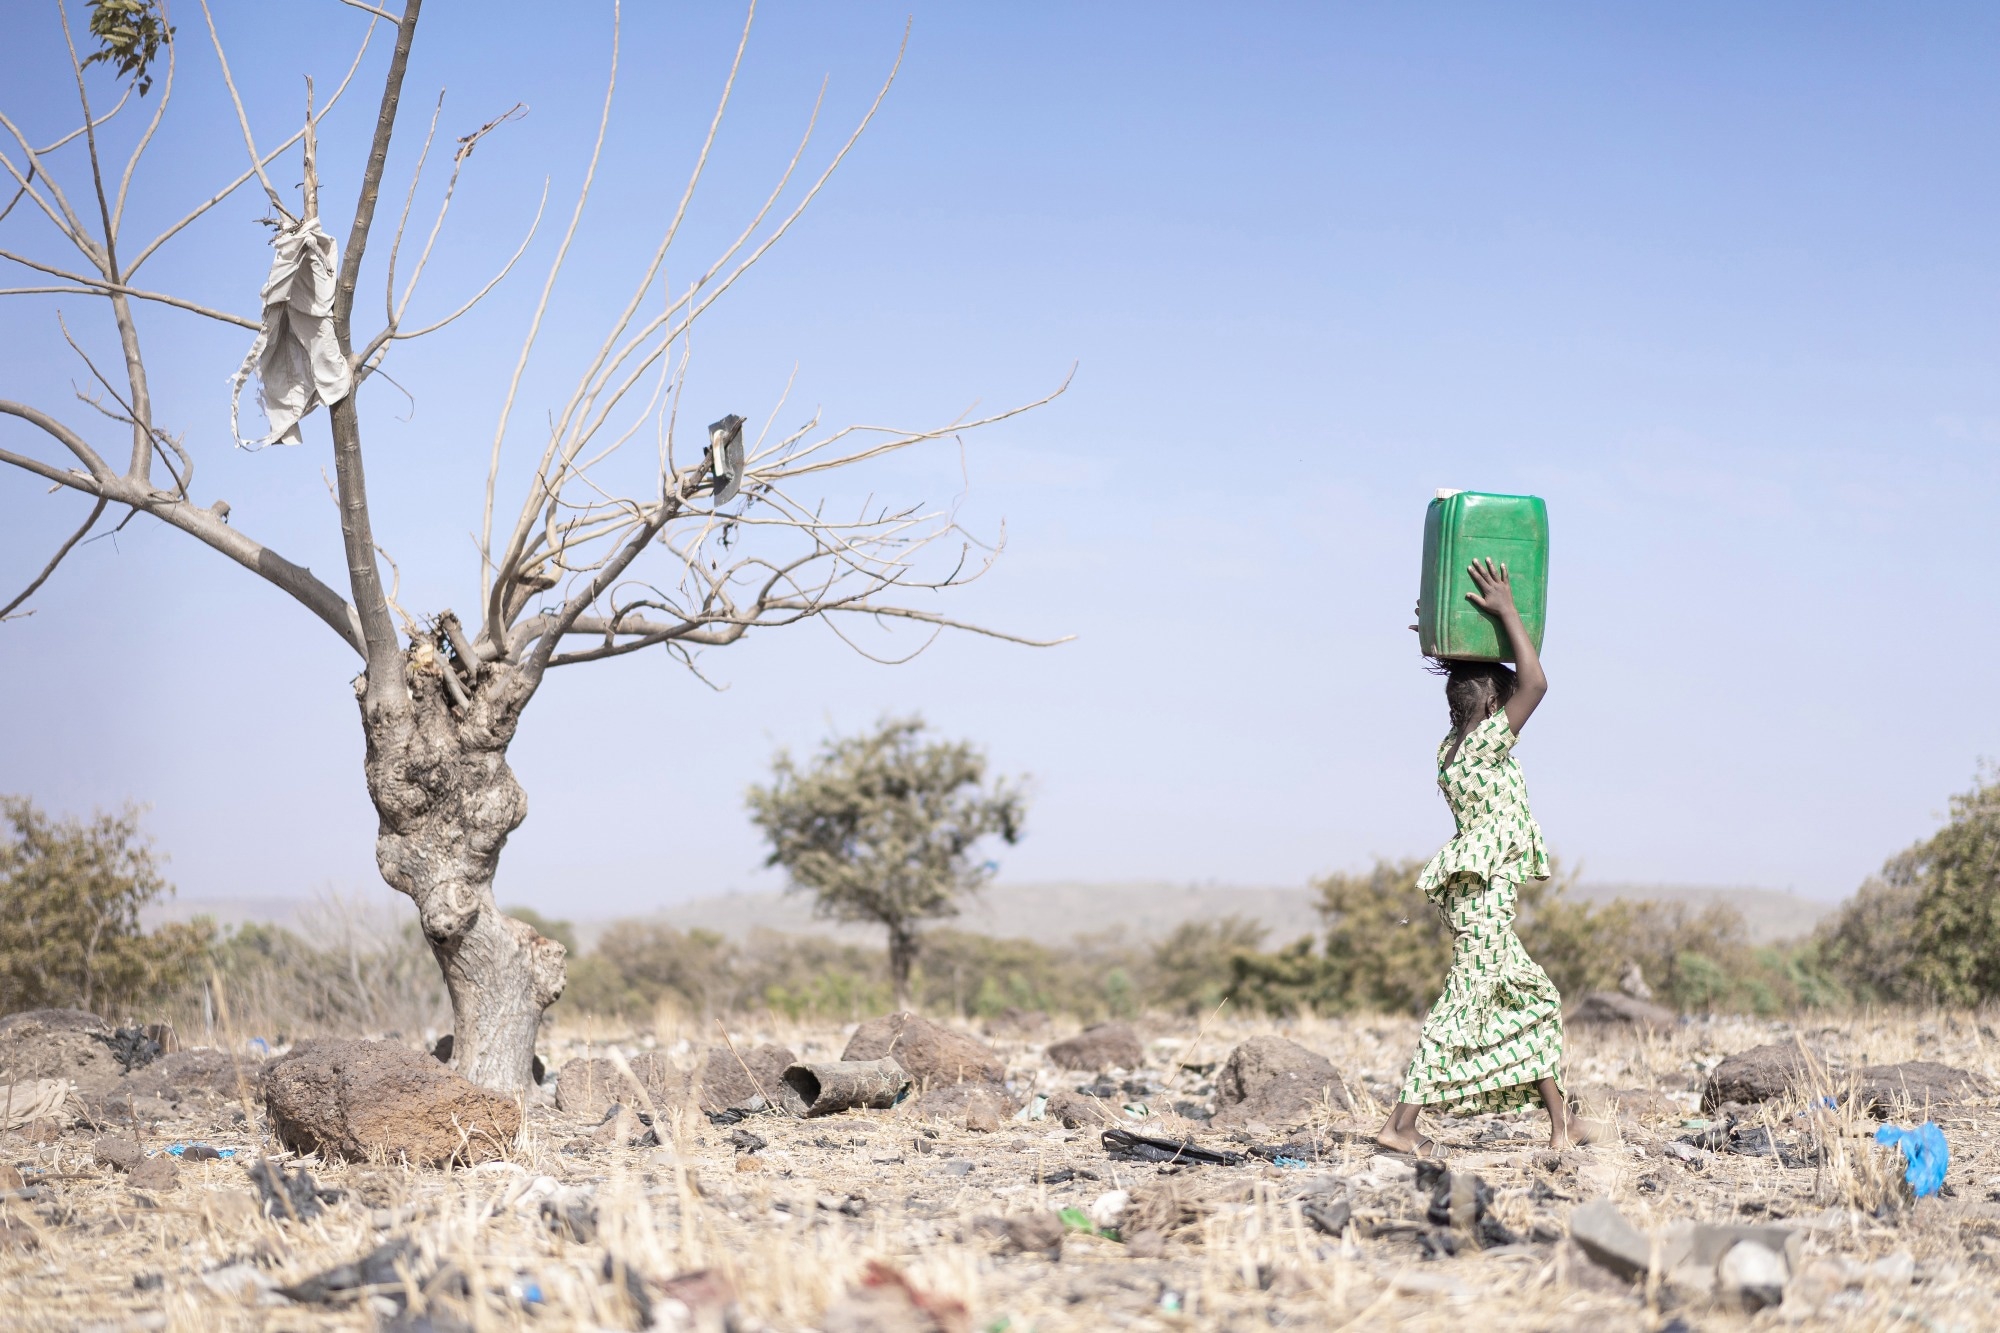 Women and girls are disproportionately affected by climate change